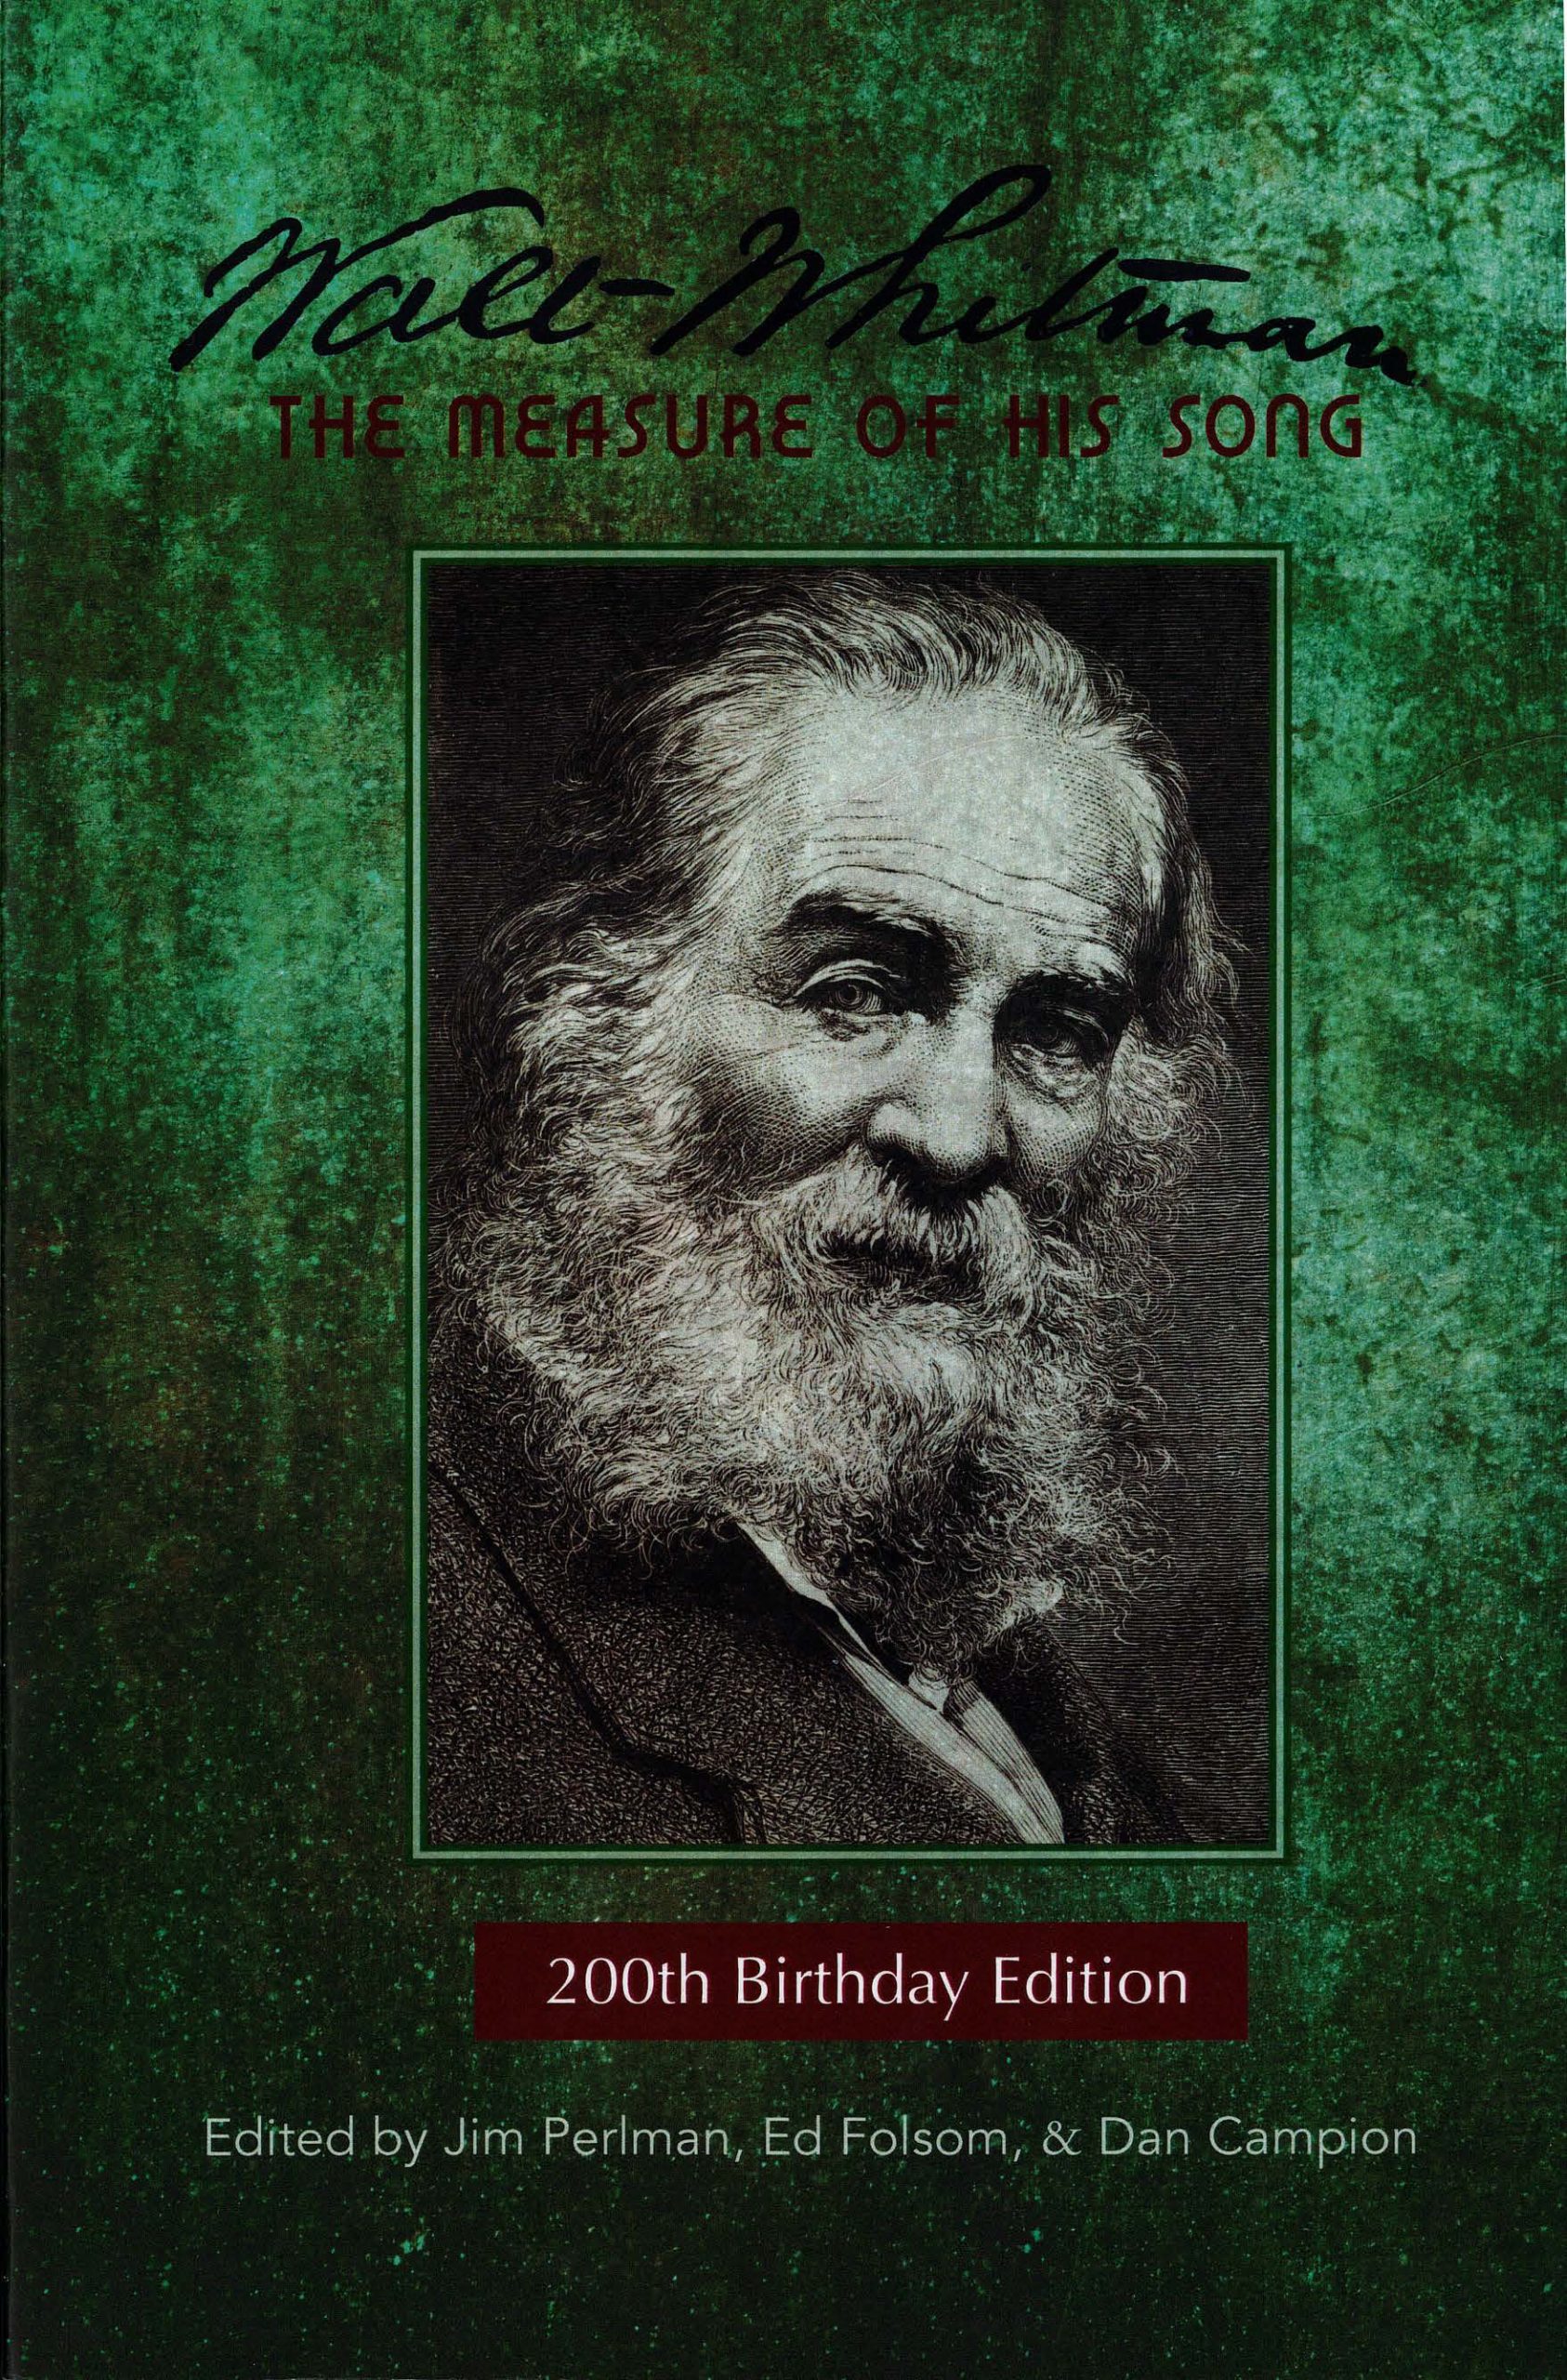 Walt Whitman: The Measure of His Song (200th Birthday Edition))